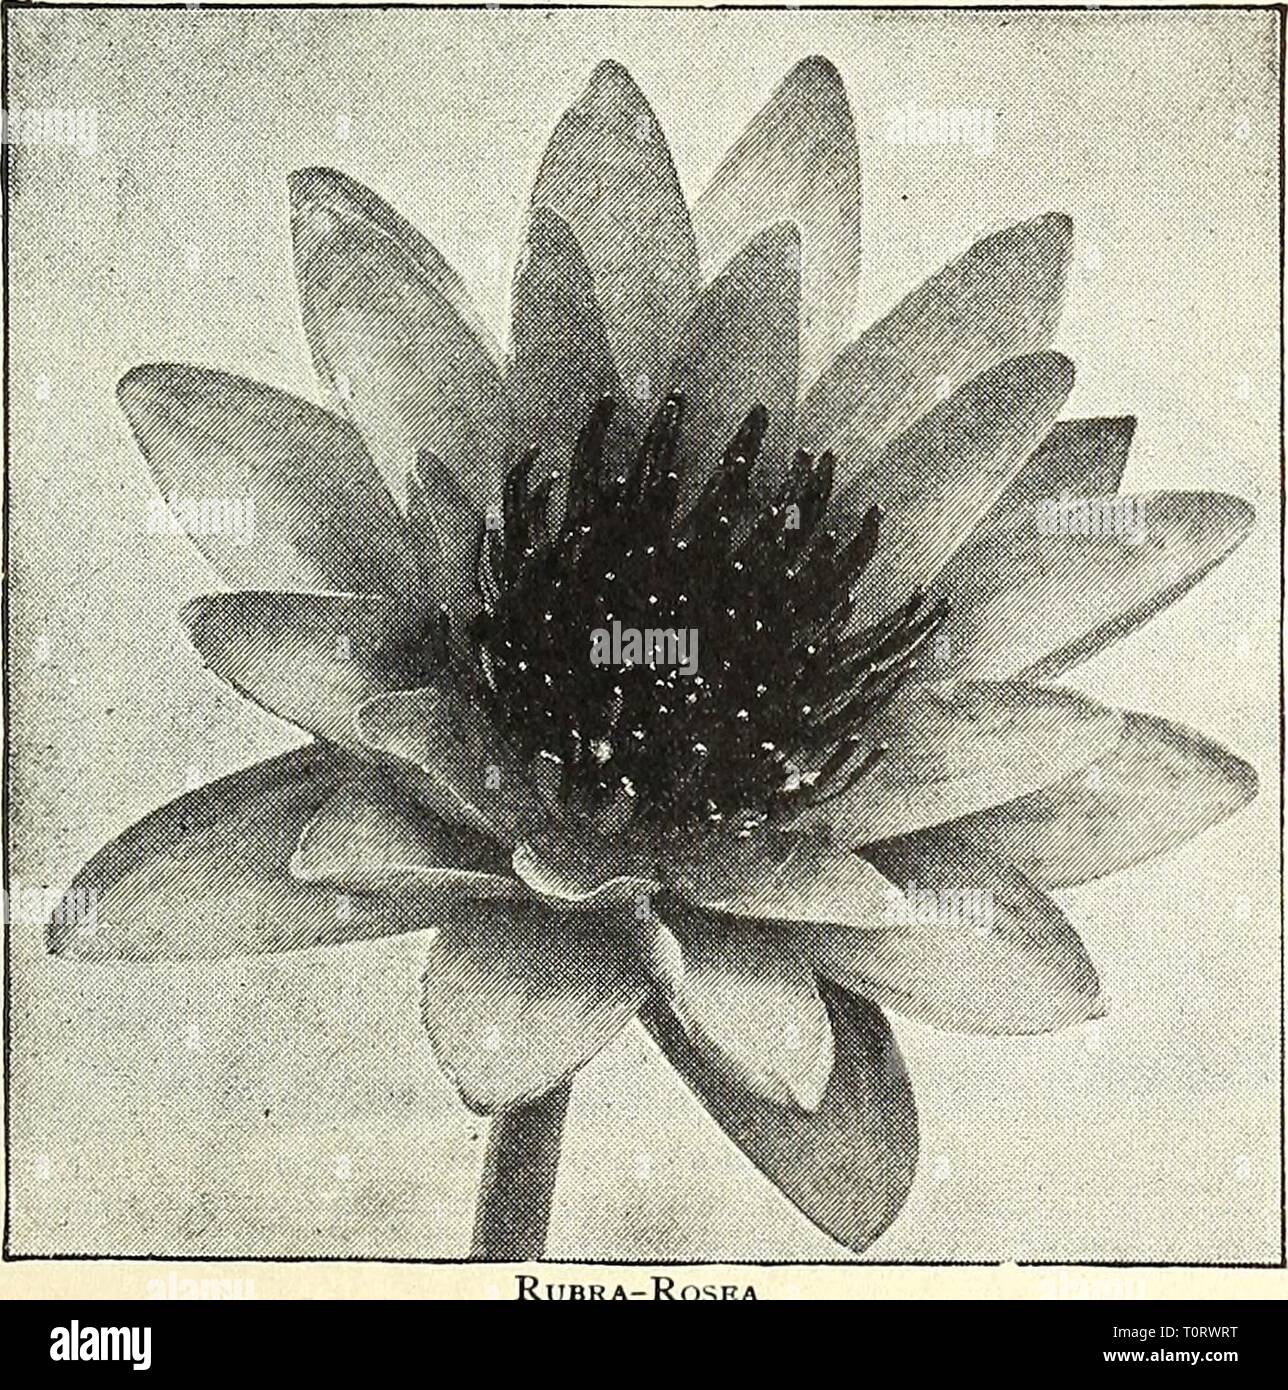 Dreer's garden book  1904 Dreer's garden book : 1904  dreersgardenbook1904henr Year: 1904  Frank Tki^lfase. Frank Trelease. (Crim- son Devoniensis'). This supeib tender night- blooming Water Lily sur- passes all other red va- rieties by the brilliancy and depth of the rich, glowing dark crimson of its flowers, which are identical in form to N. Devoniensis, 9 to 10 inches in diameter; slam- ens reddish-bronze, crim- son at the base; foliage 15 inches across, den- tated, of a glossy dark bronzy-red, resembling in color the foliage of Black Beauty Canna. $250 each. Lotus (A^. tlieniinlis, D. C).  Stock Photo